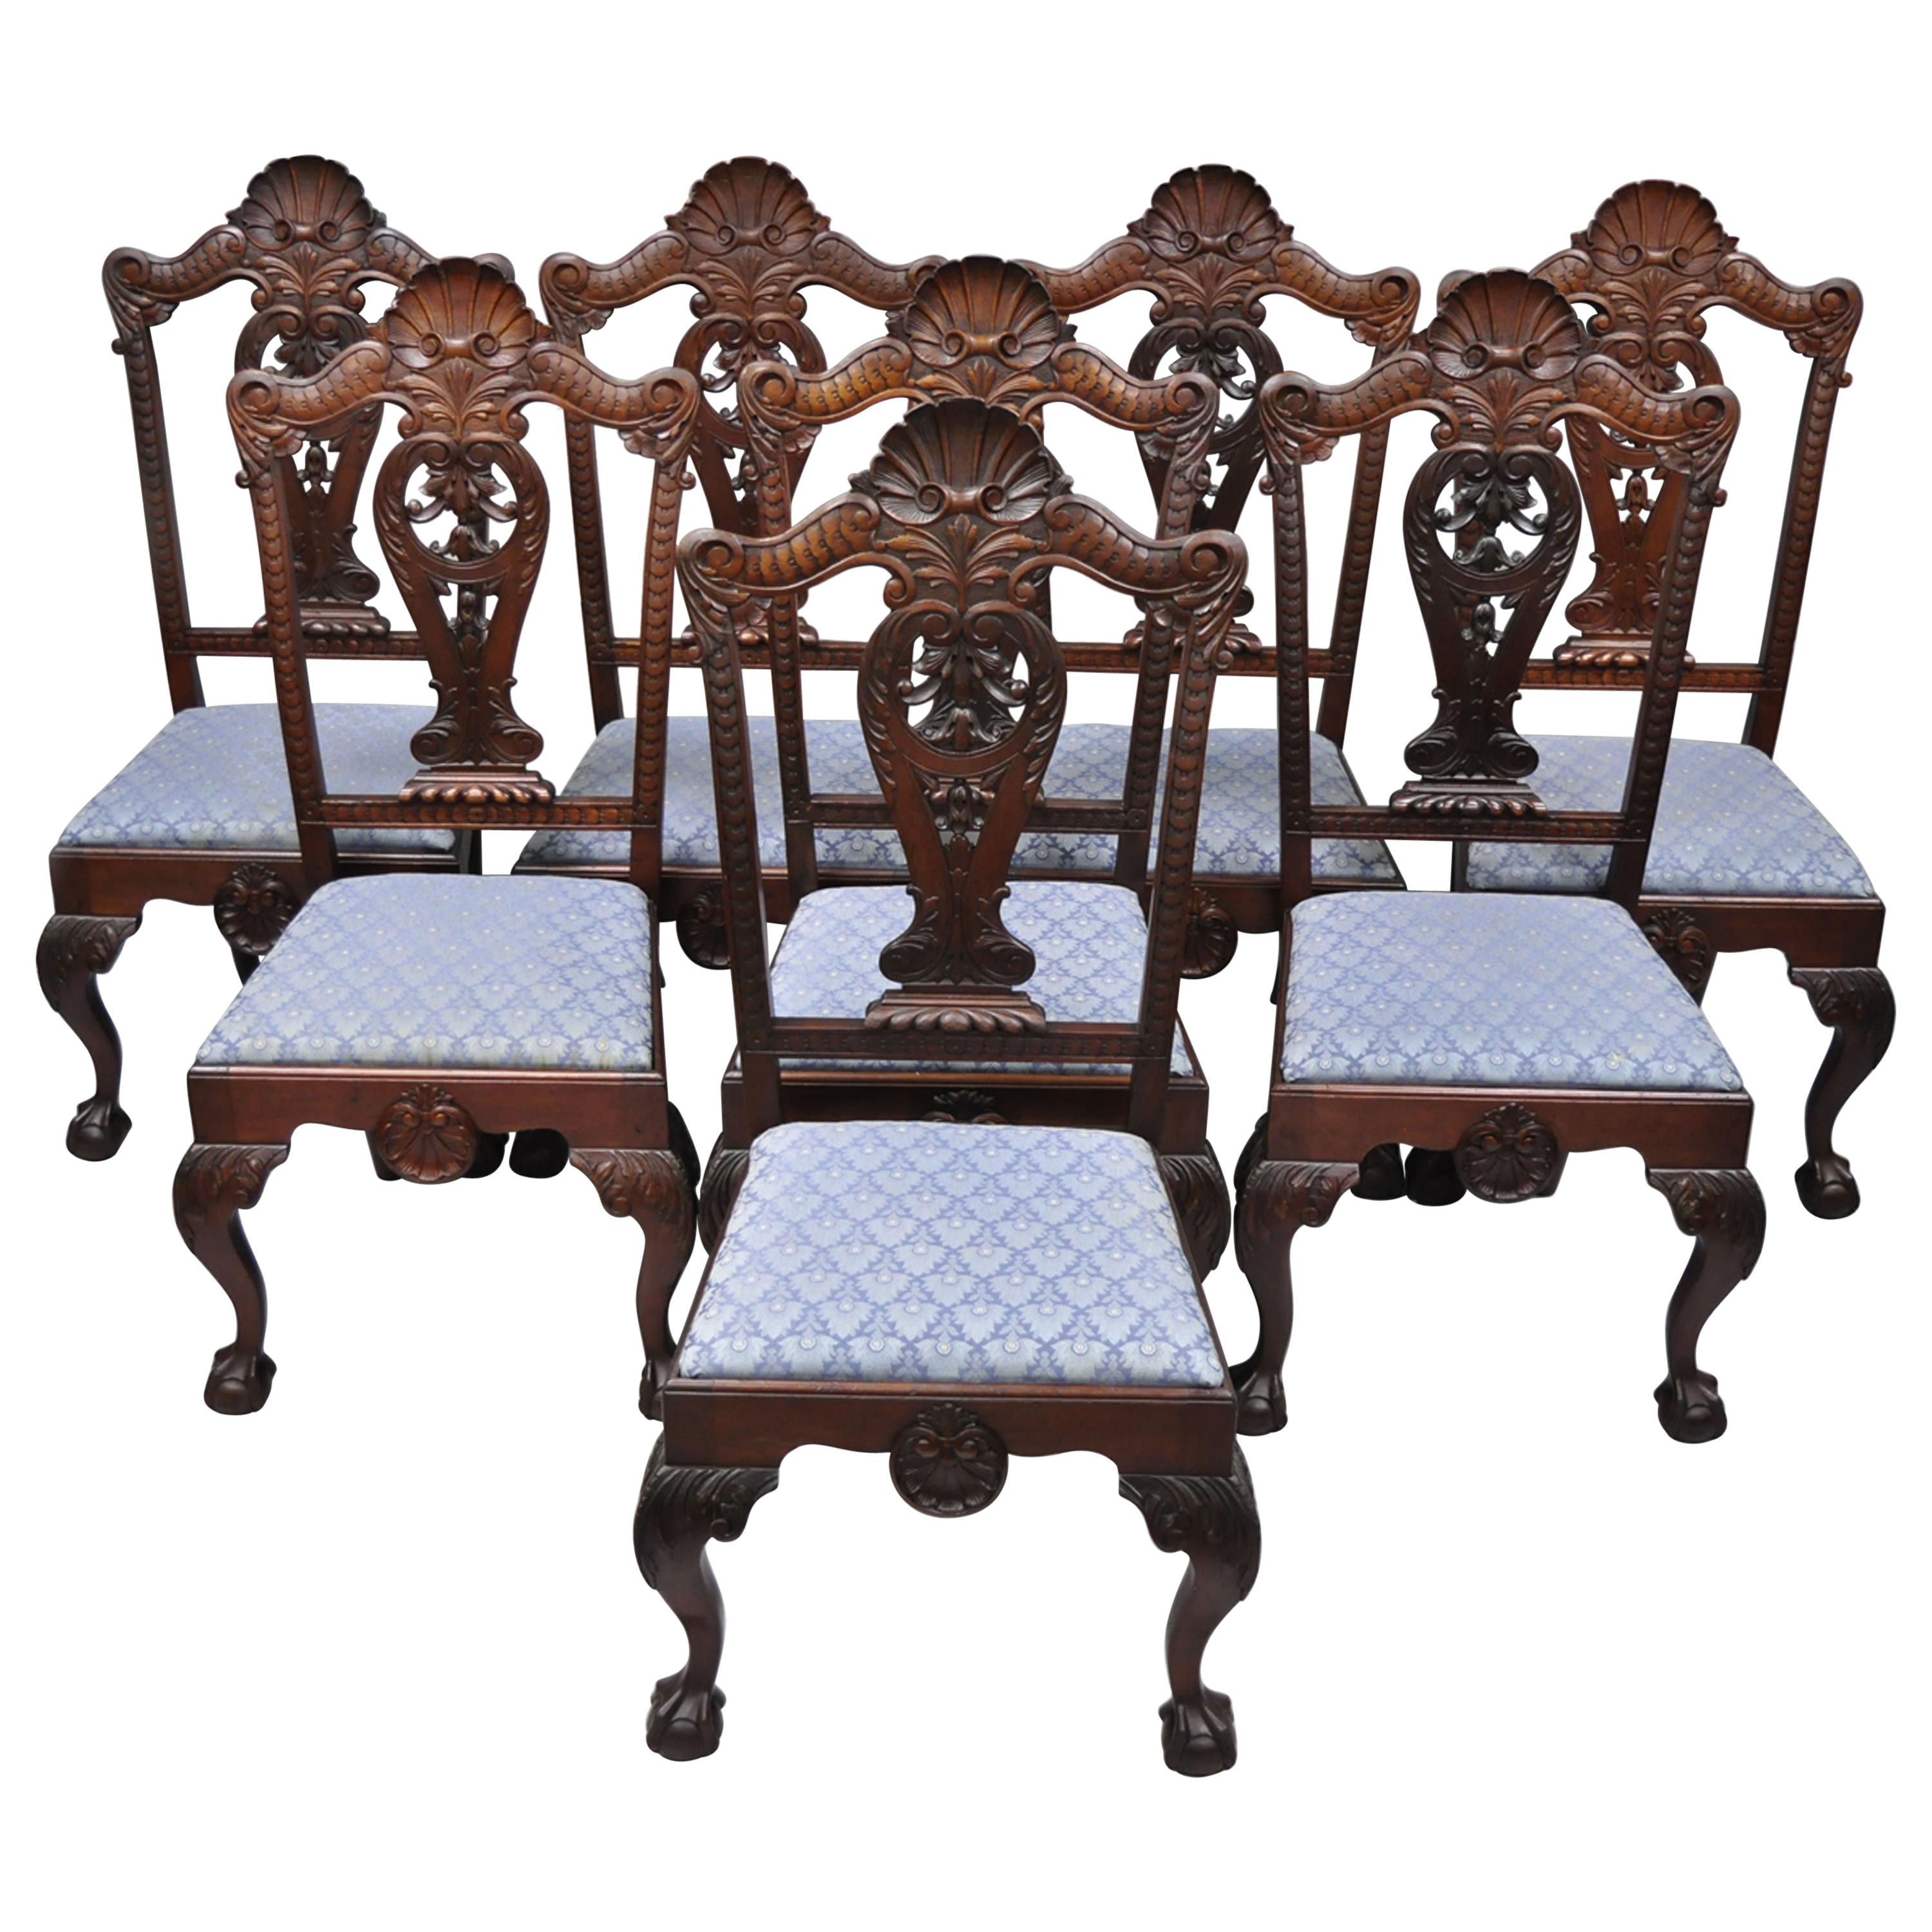 8 Antique Mahogany Georgian Chippendale, Georgian Style Dining Room Chairs